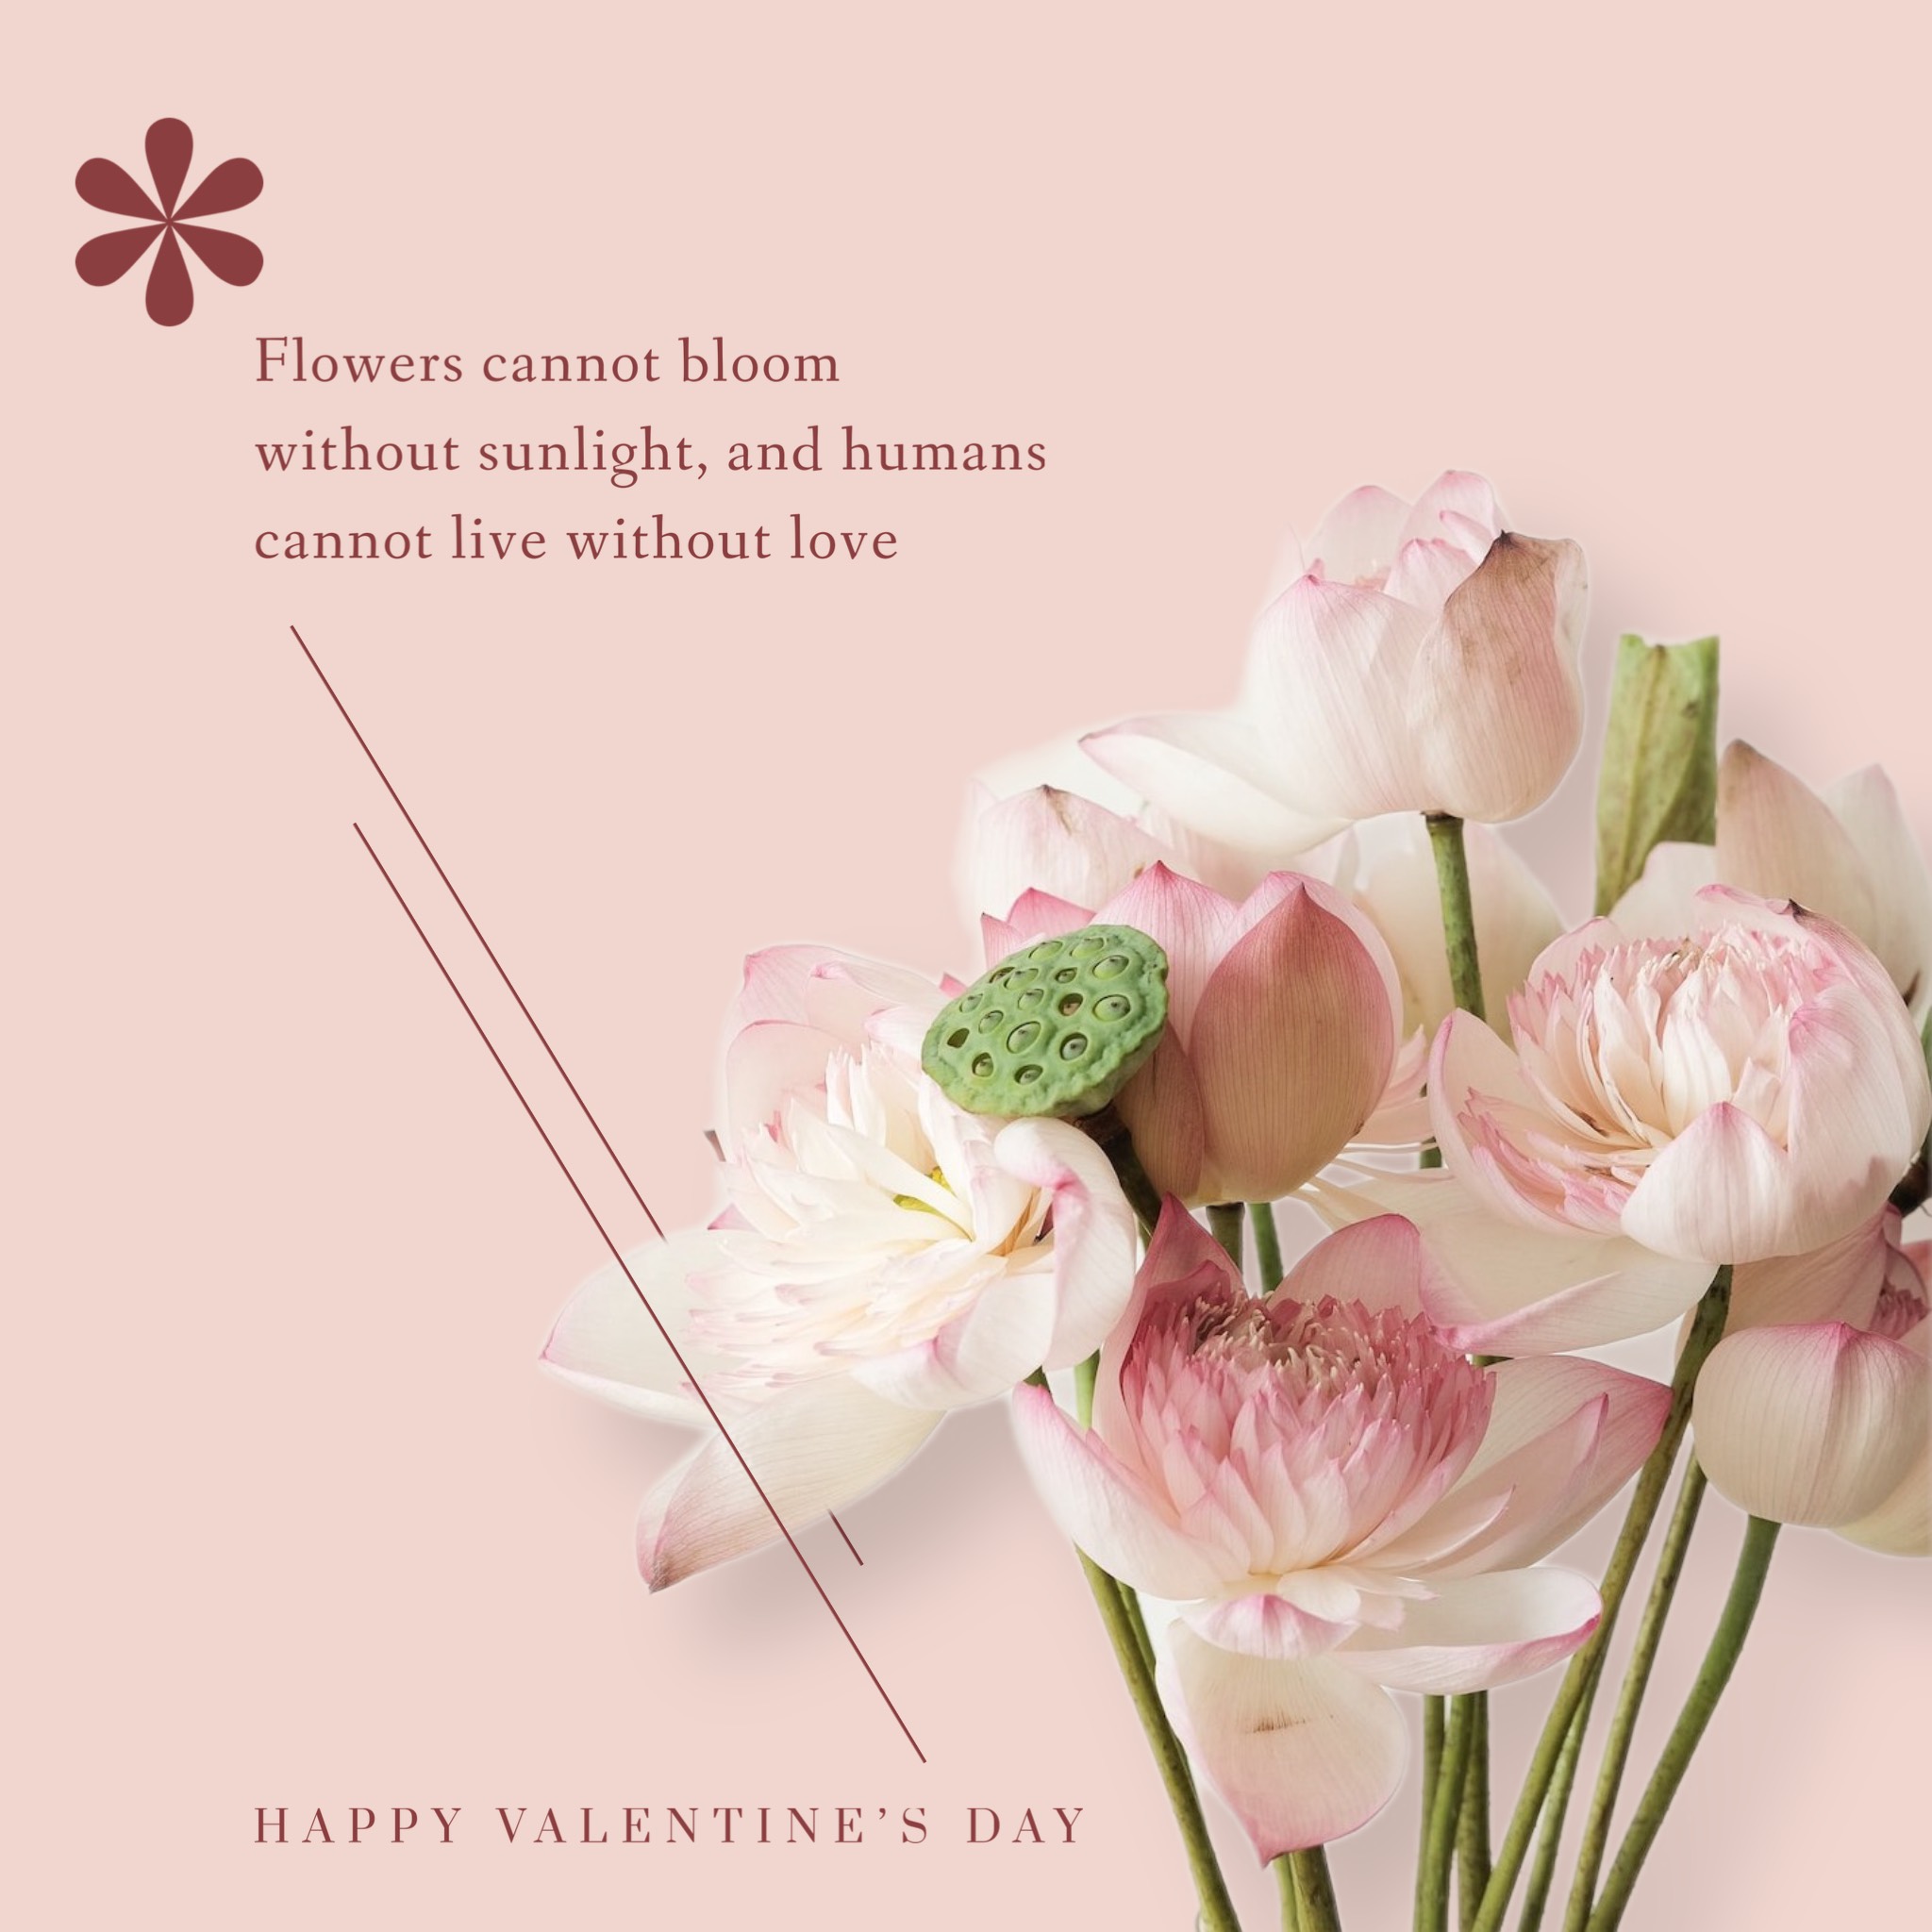 Valentine’s quote magic photo of flowers instagram post template